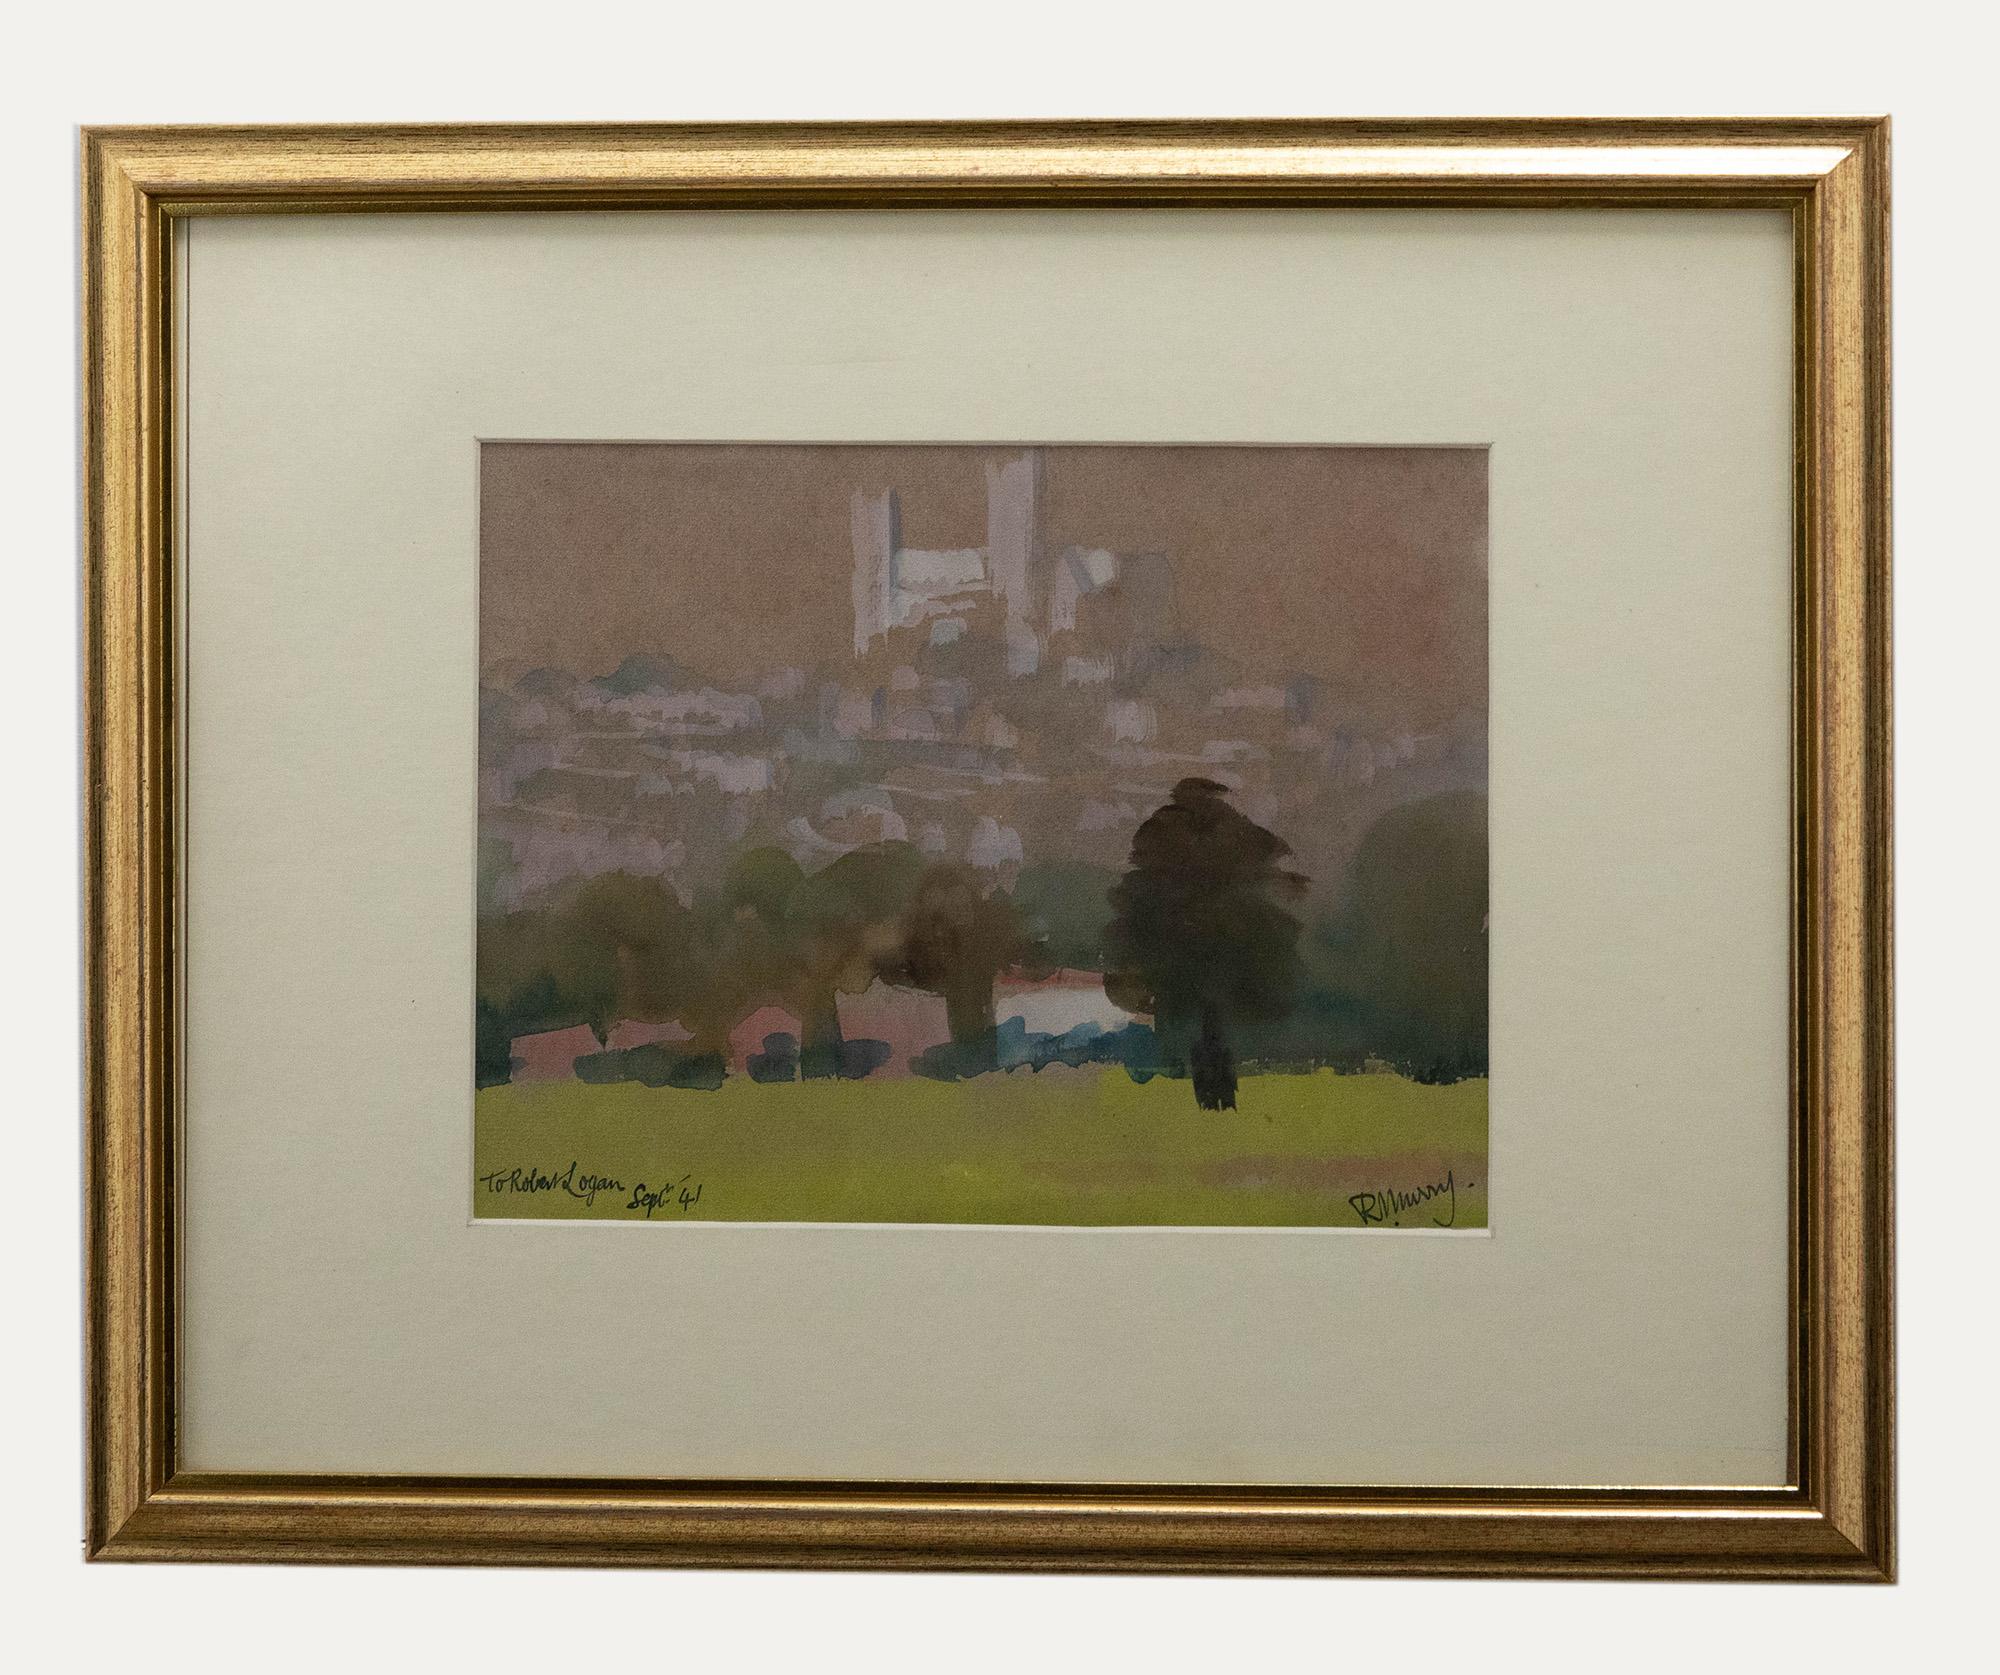 An original impressionist study by Richard Murray, depicting parkland trees before an urban city and grand cathedral. Inscribed 'To Robert Logan, September 41' to the lower left. Presented in an elegant gilt-effect frame. Signed. On paper. 